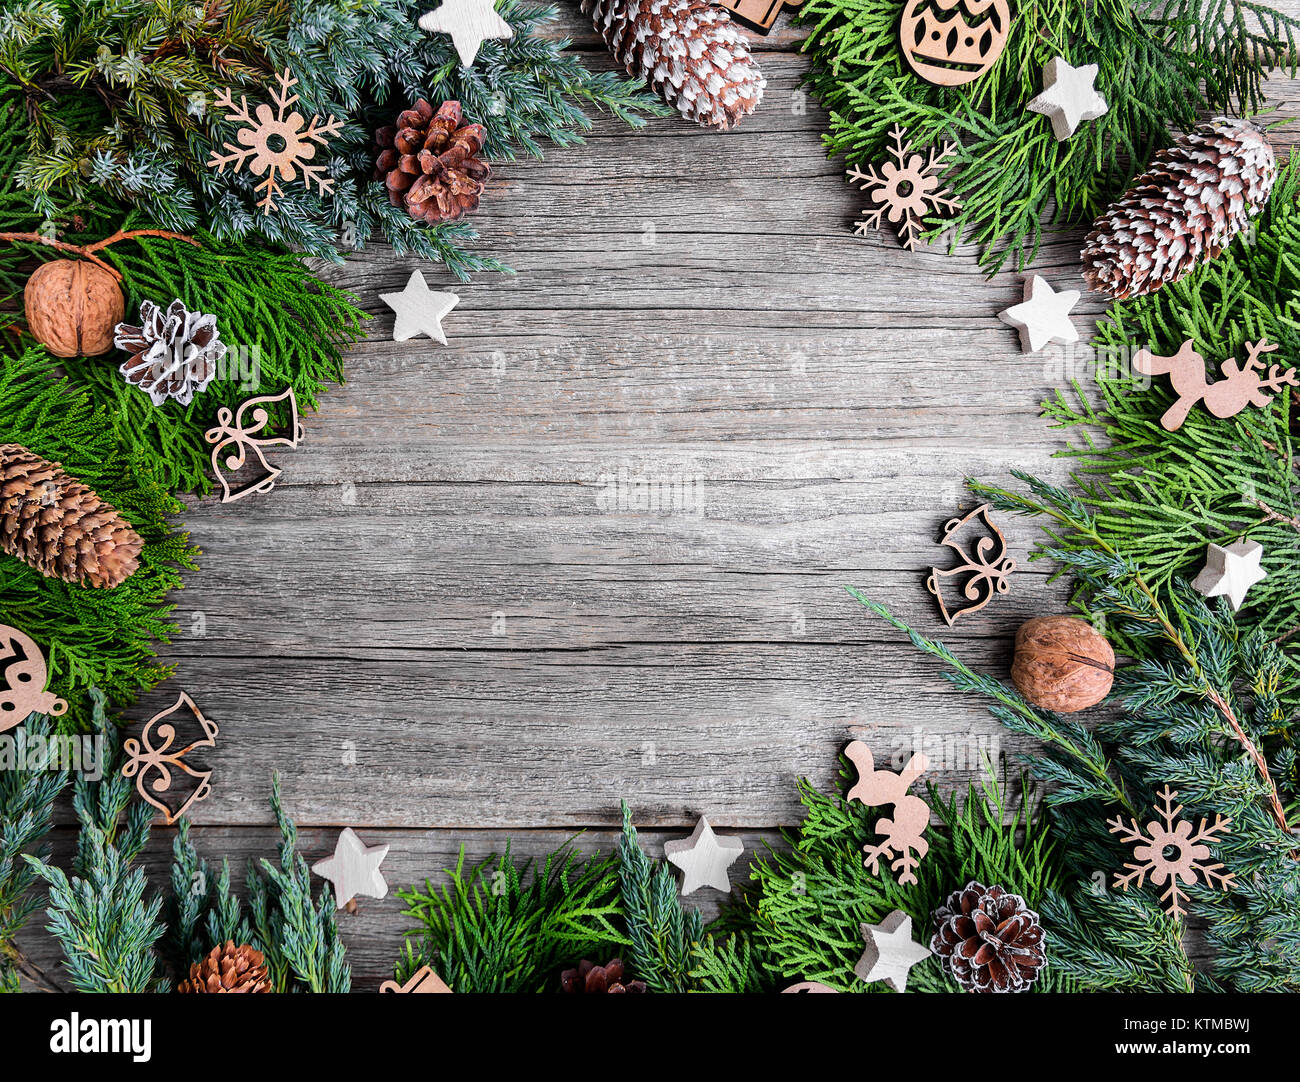 Christmas tree and nuts on wooden boards. Stock Photo